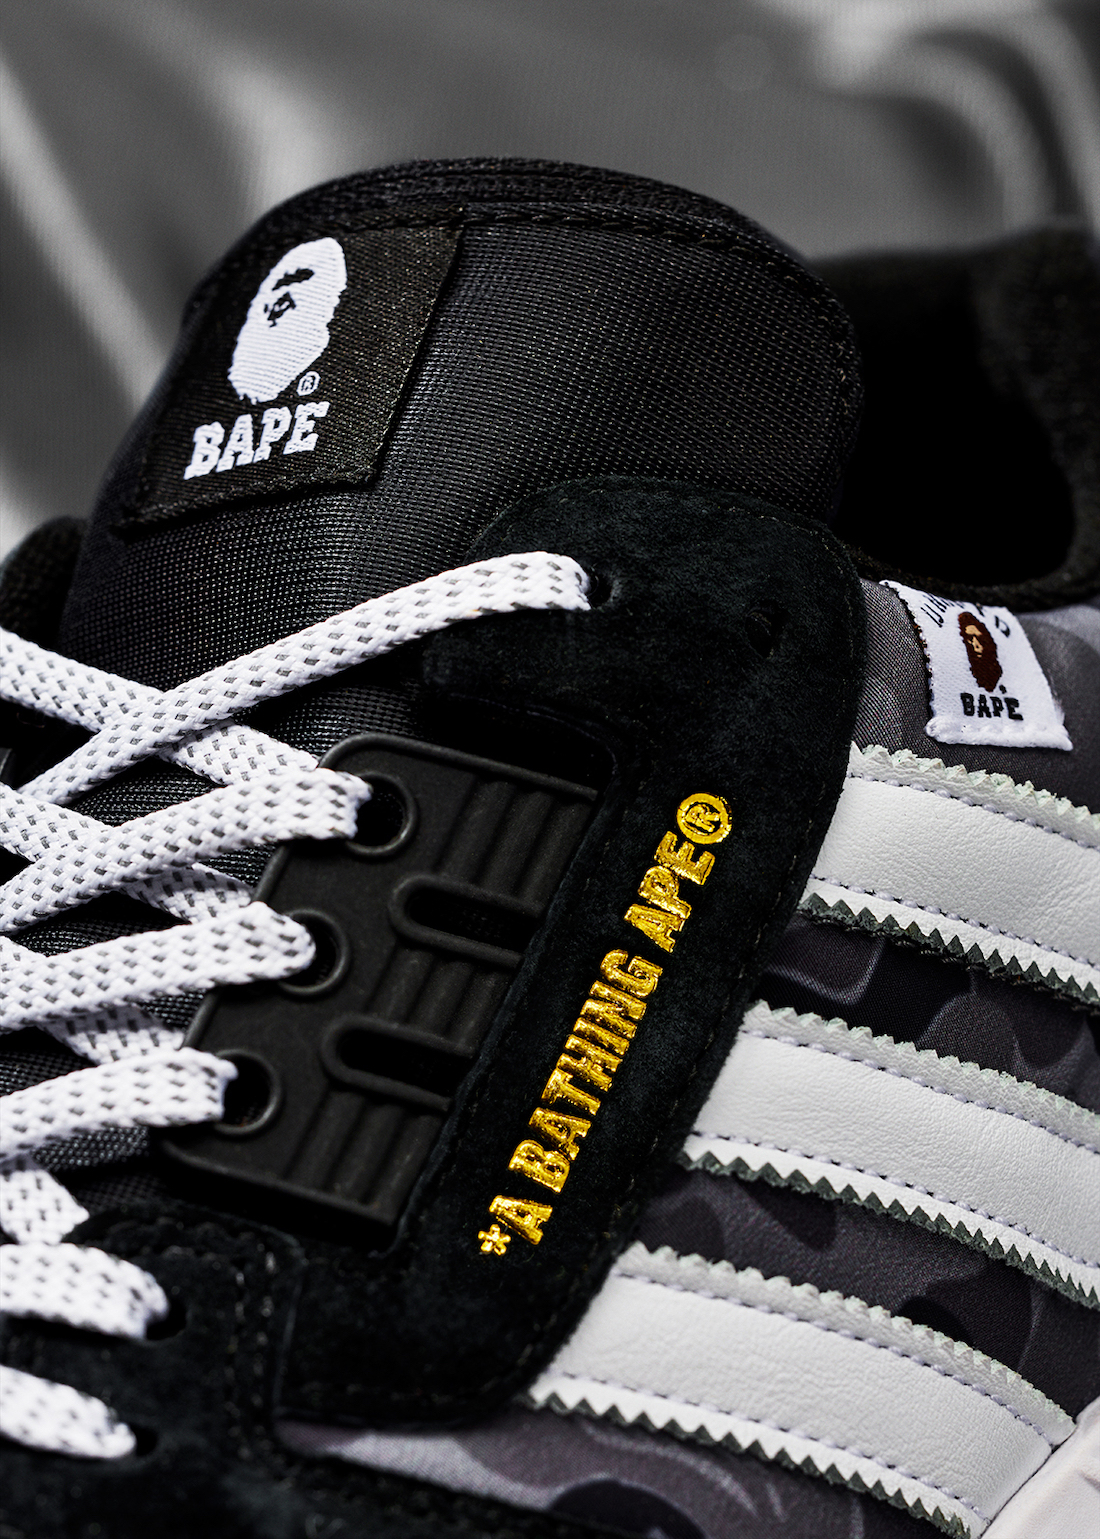 BAPE Undefeated adidas ZX 8000 FY8852 FY8851 Release Date - SBD